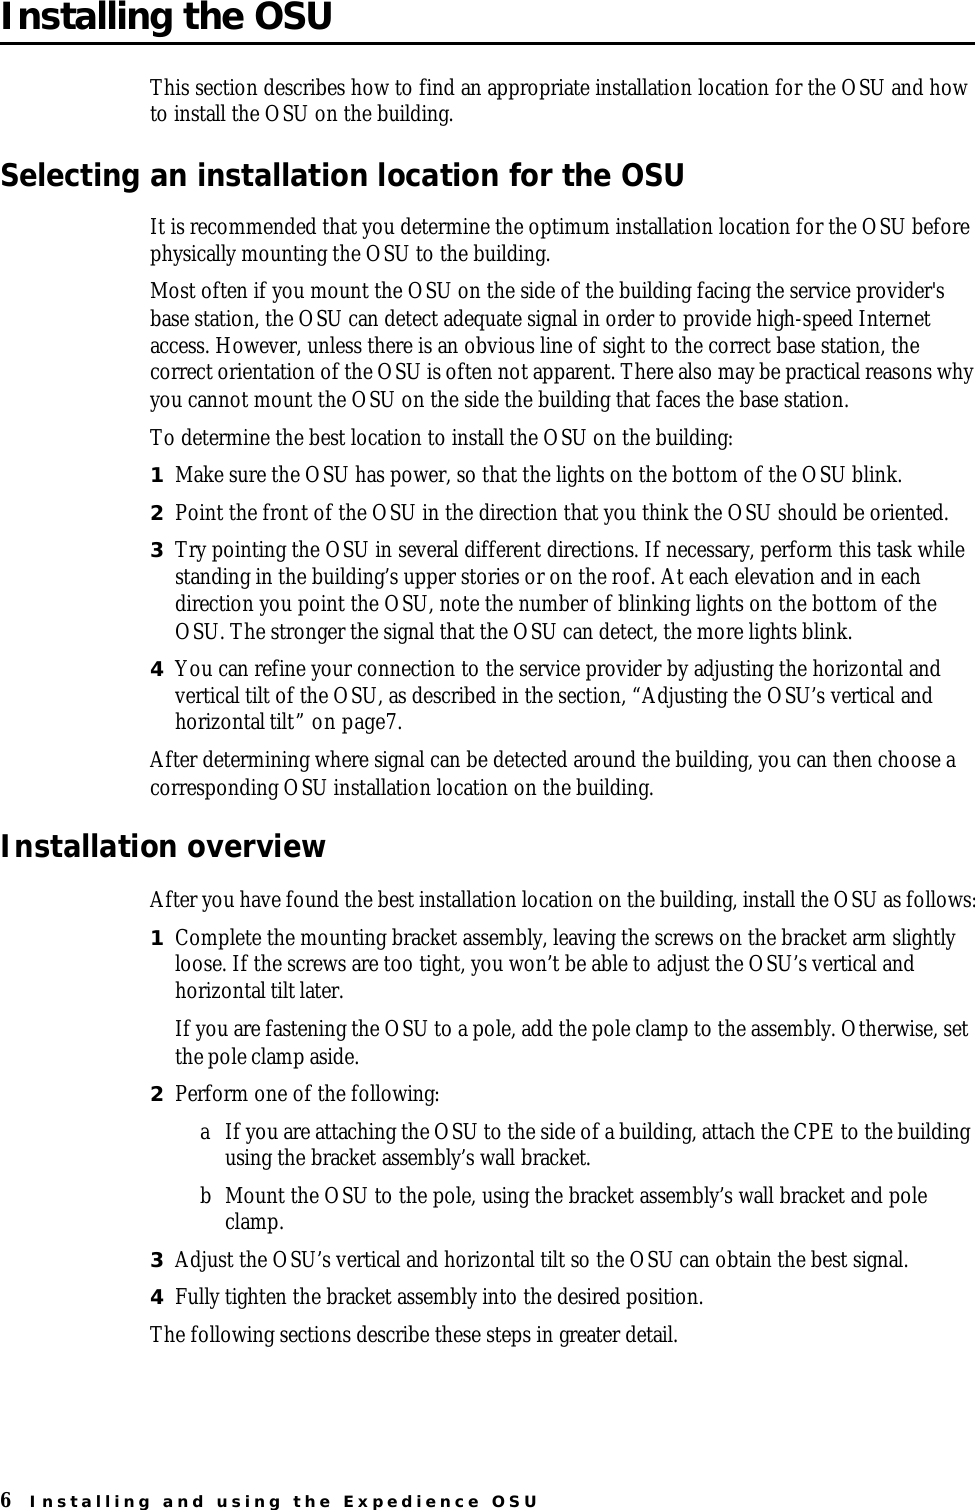 6Installing and using the Expedience OSUInstalling the OSUThis section describes how to find an appropriate installation location for the OSU and how to install the OSU on the building. Selecting an installation location for the OSUIt is recommended that you determine the optimum installation location for the OSU before physically mounting the OSU to the building. Most often if you mount the OSU on the side of the building facing the service provider&apos;s base station, the OSU can detect adequate signal in order to provide high-speed Internet access. However, unless there is an obvious line of sight to the correct base station, the correct orientation of the OSU is often not apparent. There also may be practical reasons why you cannot mount the OSU on the side the building that faces the base station. To determine the best location to install the OSU on the building:1Make sure the OSU has power, so that the lights on the bottom of the OSU blink. 2Point the front of the OSU in the direction that you think the OSU should be oriented. 3Try pointing the OSU in several different directions. If necessary, perform this task while standing in the building’s upper stories or on the roof. At each elevation and in each direction you point the OSU, note the number of blinking lights on the bottom of the OSU. The stronger the signal that the OSU can detect, the more lights blink. 4You can refine your connection to the service provider by adjusting the horizontal and vertical tilt of the OSU, as described in the section, “Adjusting the OSU’s vertical and horizontal tilt” on page7.After determining where signal can be detected around the building, you can then choose a corresponding OSU installation location on the building. Installation overviewAfter you have found the best installation location on the building, install the OSU as follows:1Complete the mounting bracket assembly, leaving the screws on the bracket arm slightly loose. If the screws are too tight, you won’t be able to adjust the OSU’s vertical and horizontal tilt later.If you are fastening the OSU to a pole, add the pole clamp to the assembly. Otherwise, set the pole clamp aside.2Perform one of the following: aIf you are attaching the OSU to the side of a building, attach the CPE to the building using the bracket assembly’s wall bracket. bMount the OSU to the pole, using the bracket assembly’s wall bracket and pole clamp. 3Adjust the OSU’s vertical and horizontal tilt so the OSU can obtain the best signal. 4Fully tighten the bracket assembly into the desired position. The following sections describe these steps in greater detail.